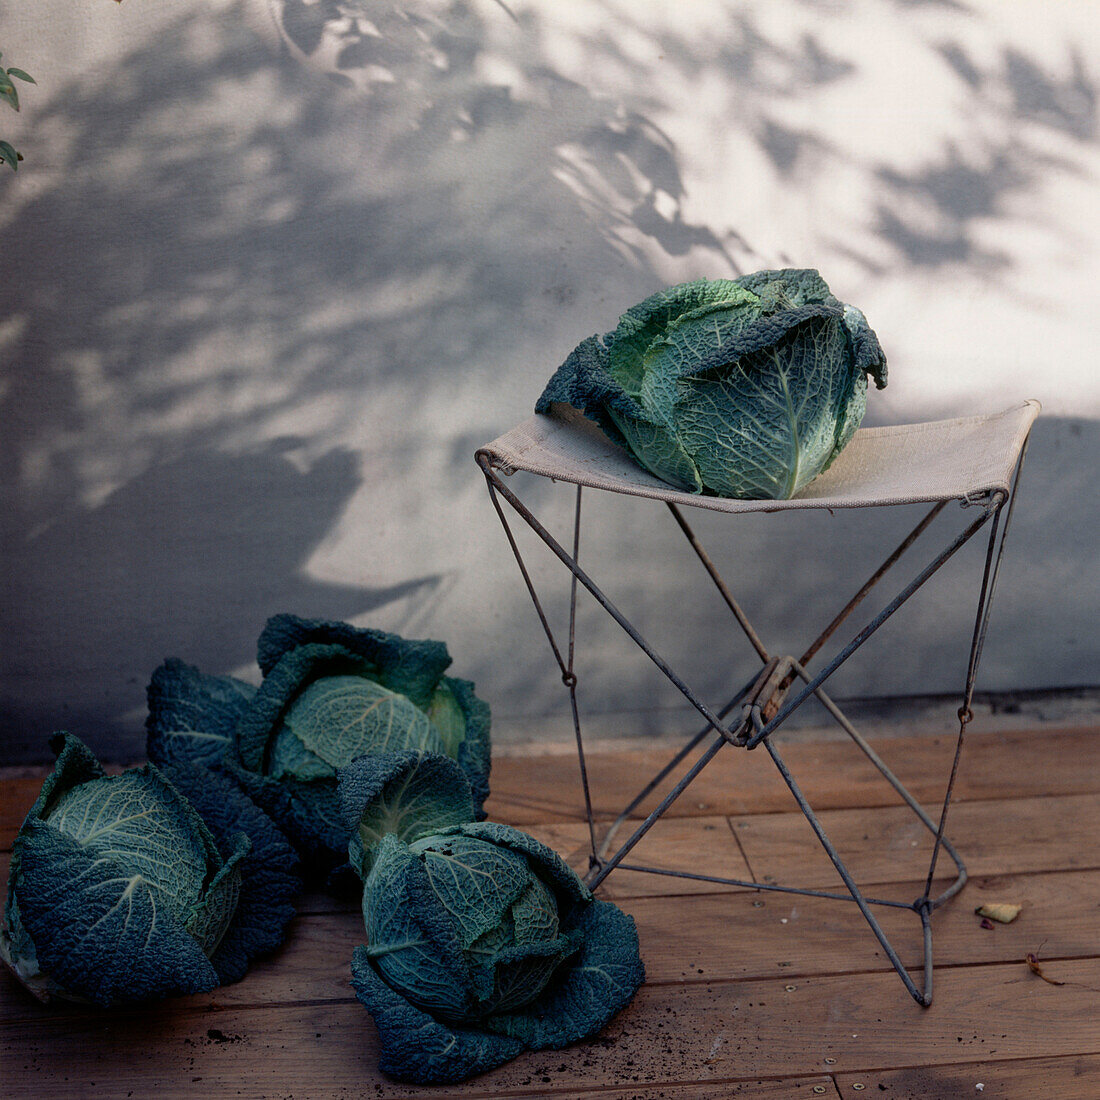 Four homegrown Savoy cabbages on a decked terrace with a gardening chair